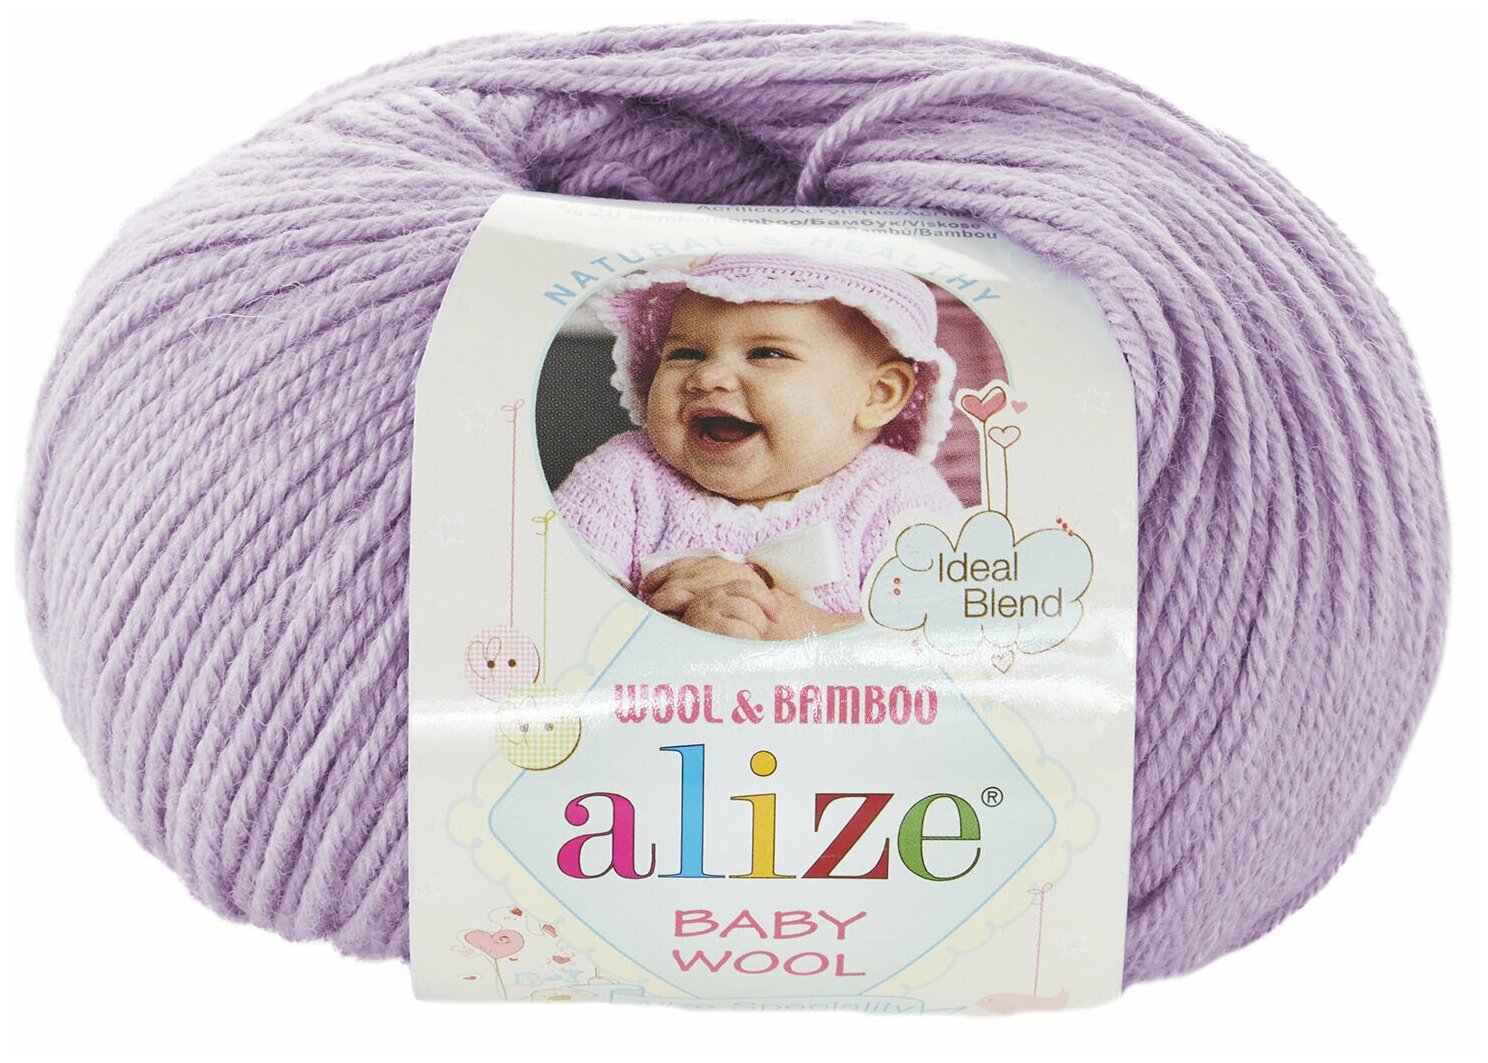  Alize Baby Wool  (146), 40%/20%/40%, 175, 50, 2